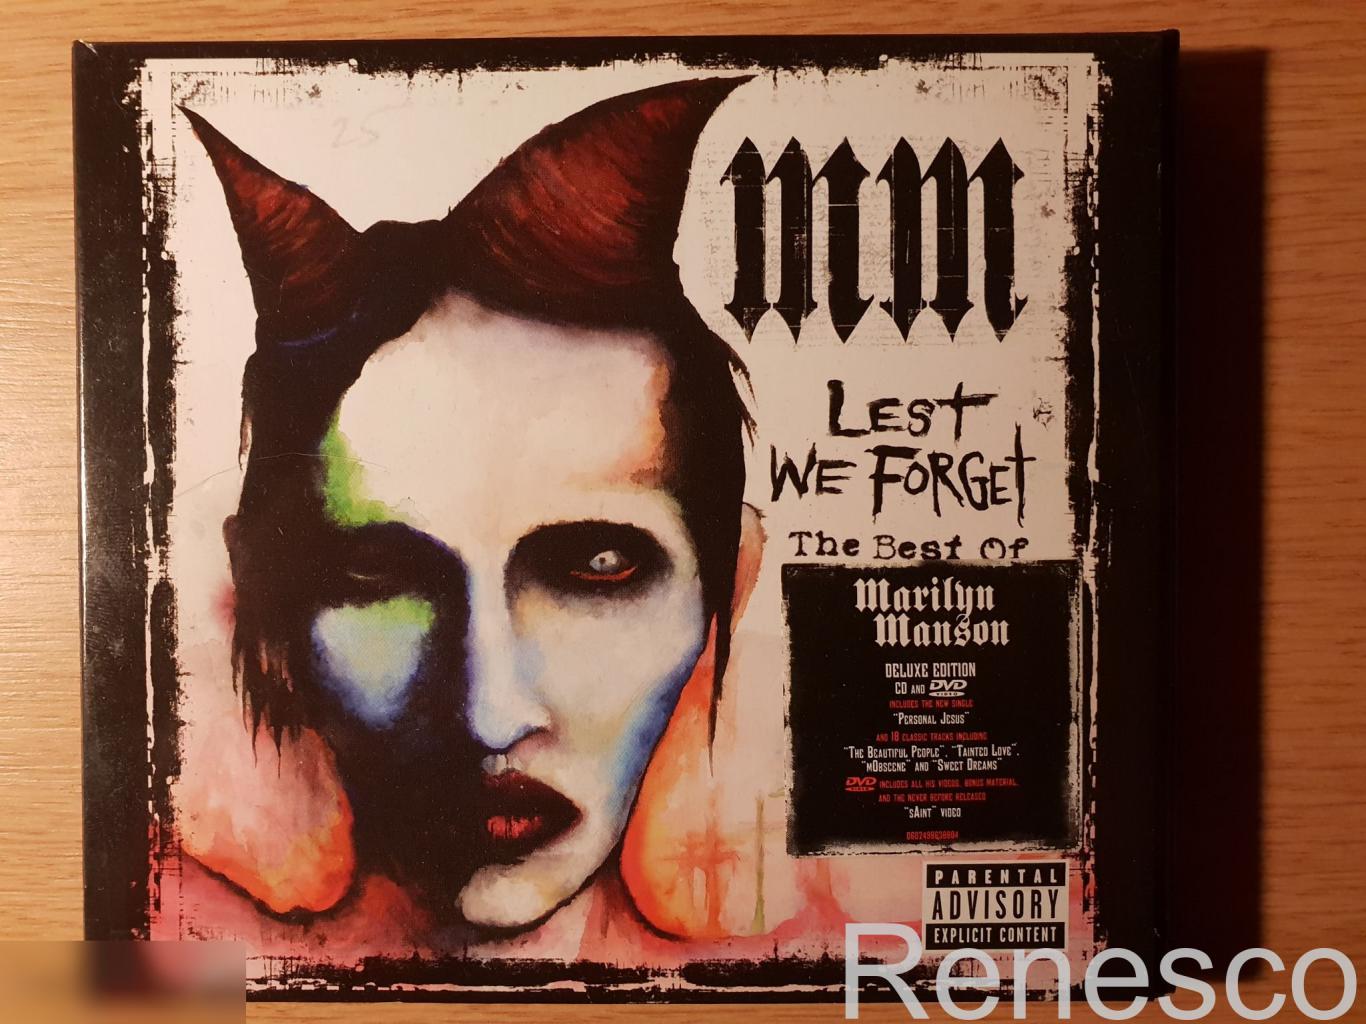 Marilyn Manson ?– Lest We Forget - The Best Of (2004) (Europe) (Deluxe Edition)